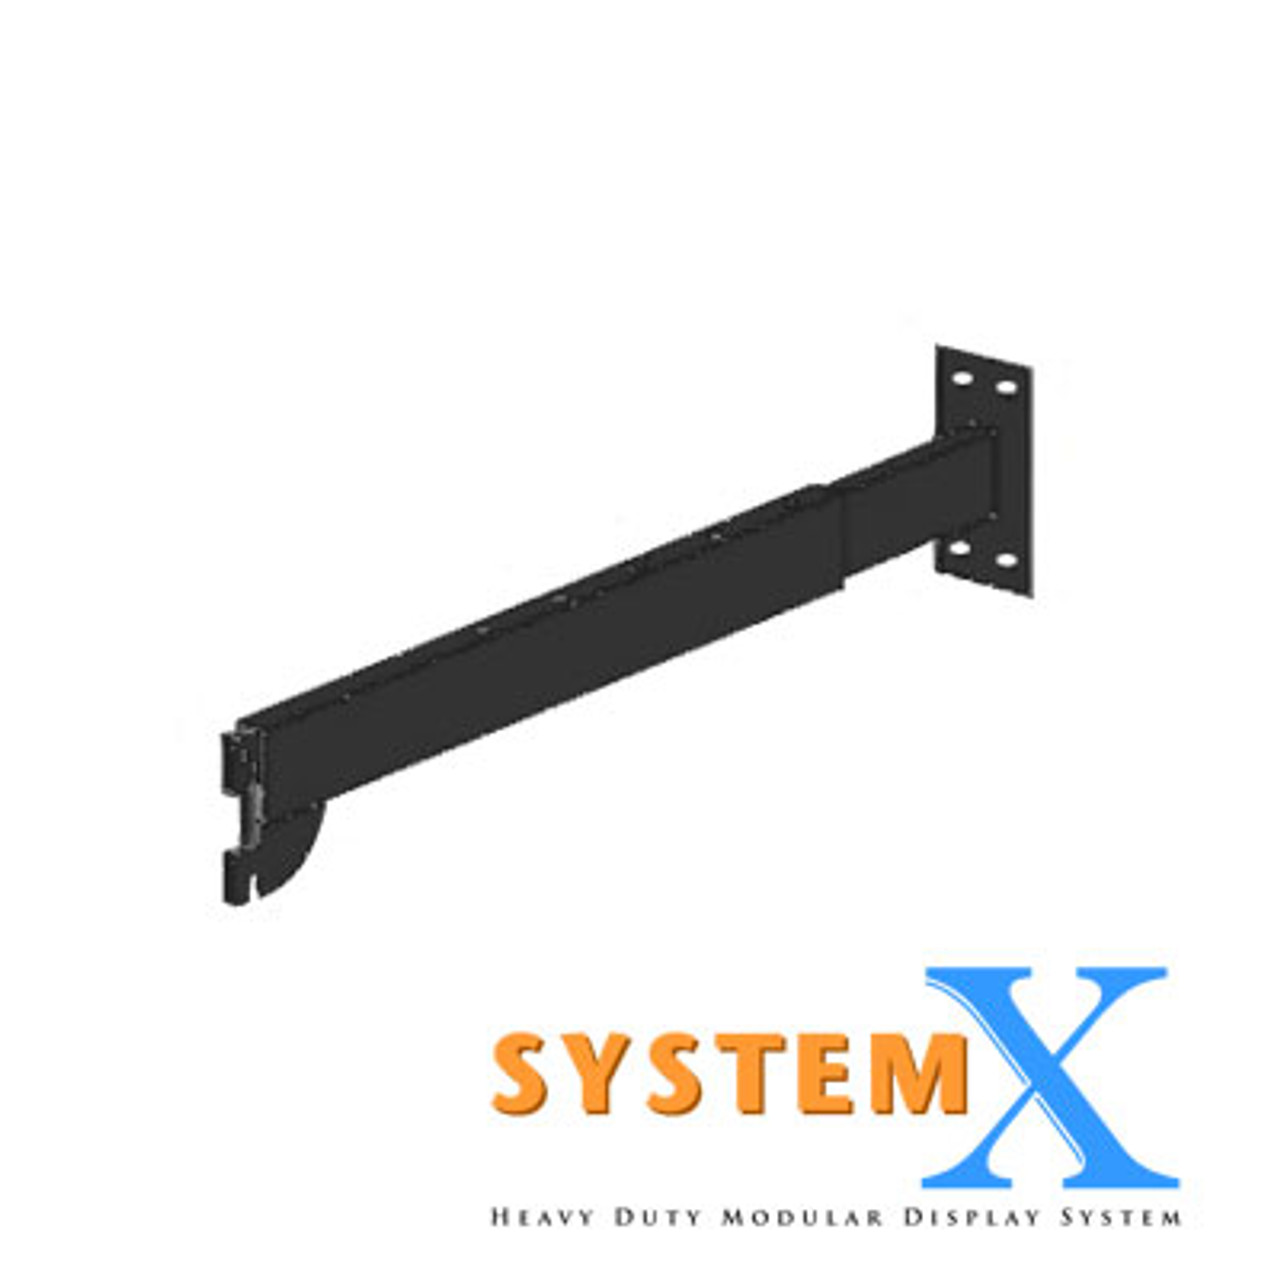 Adjustable Wall Mount Bracket for 240342 System X Outrigger Post